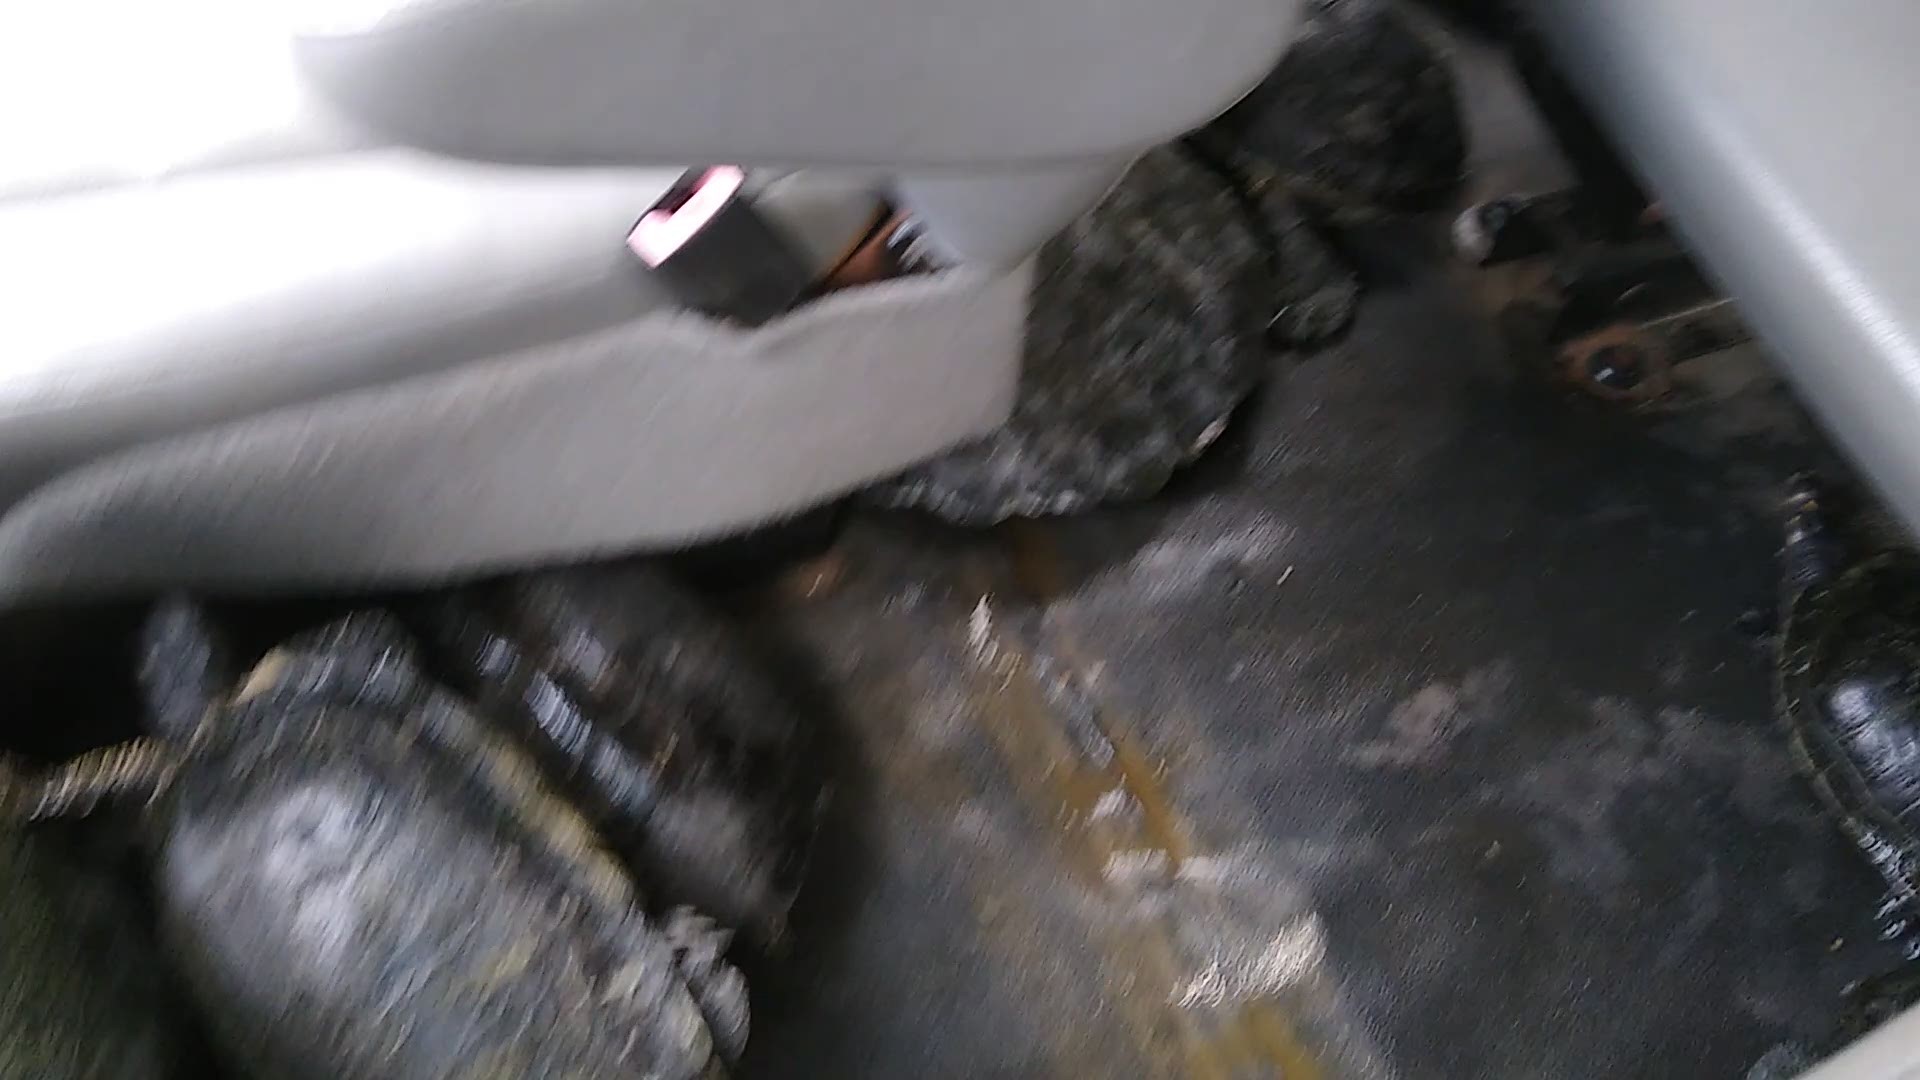 In a video shared by the zoo, workers were keeping dozens of tortoises warm in a van.